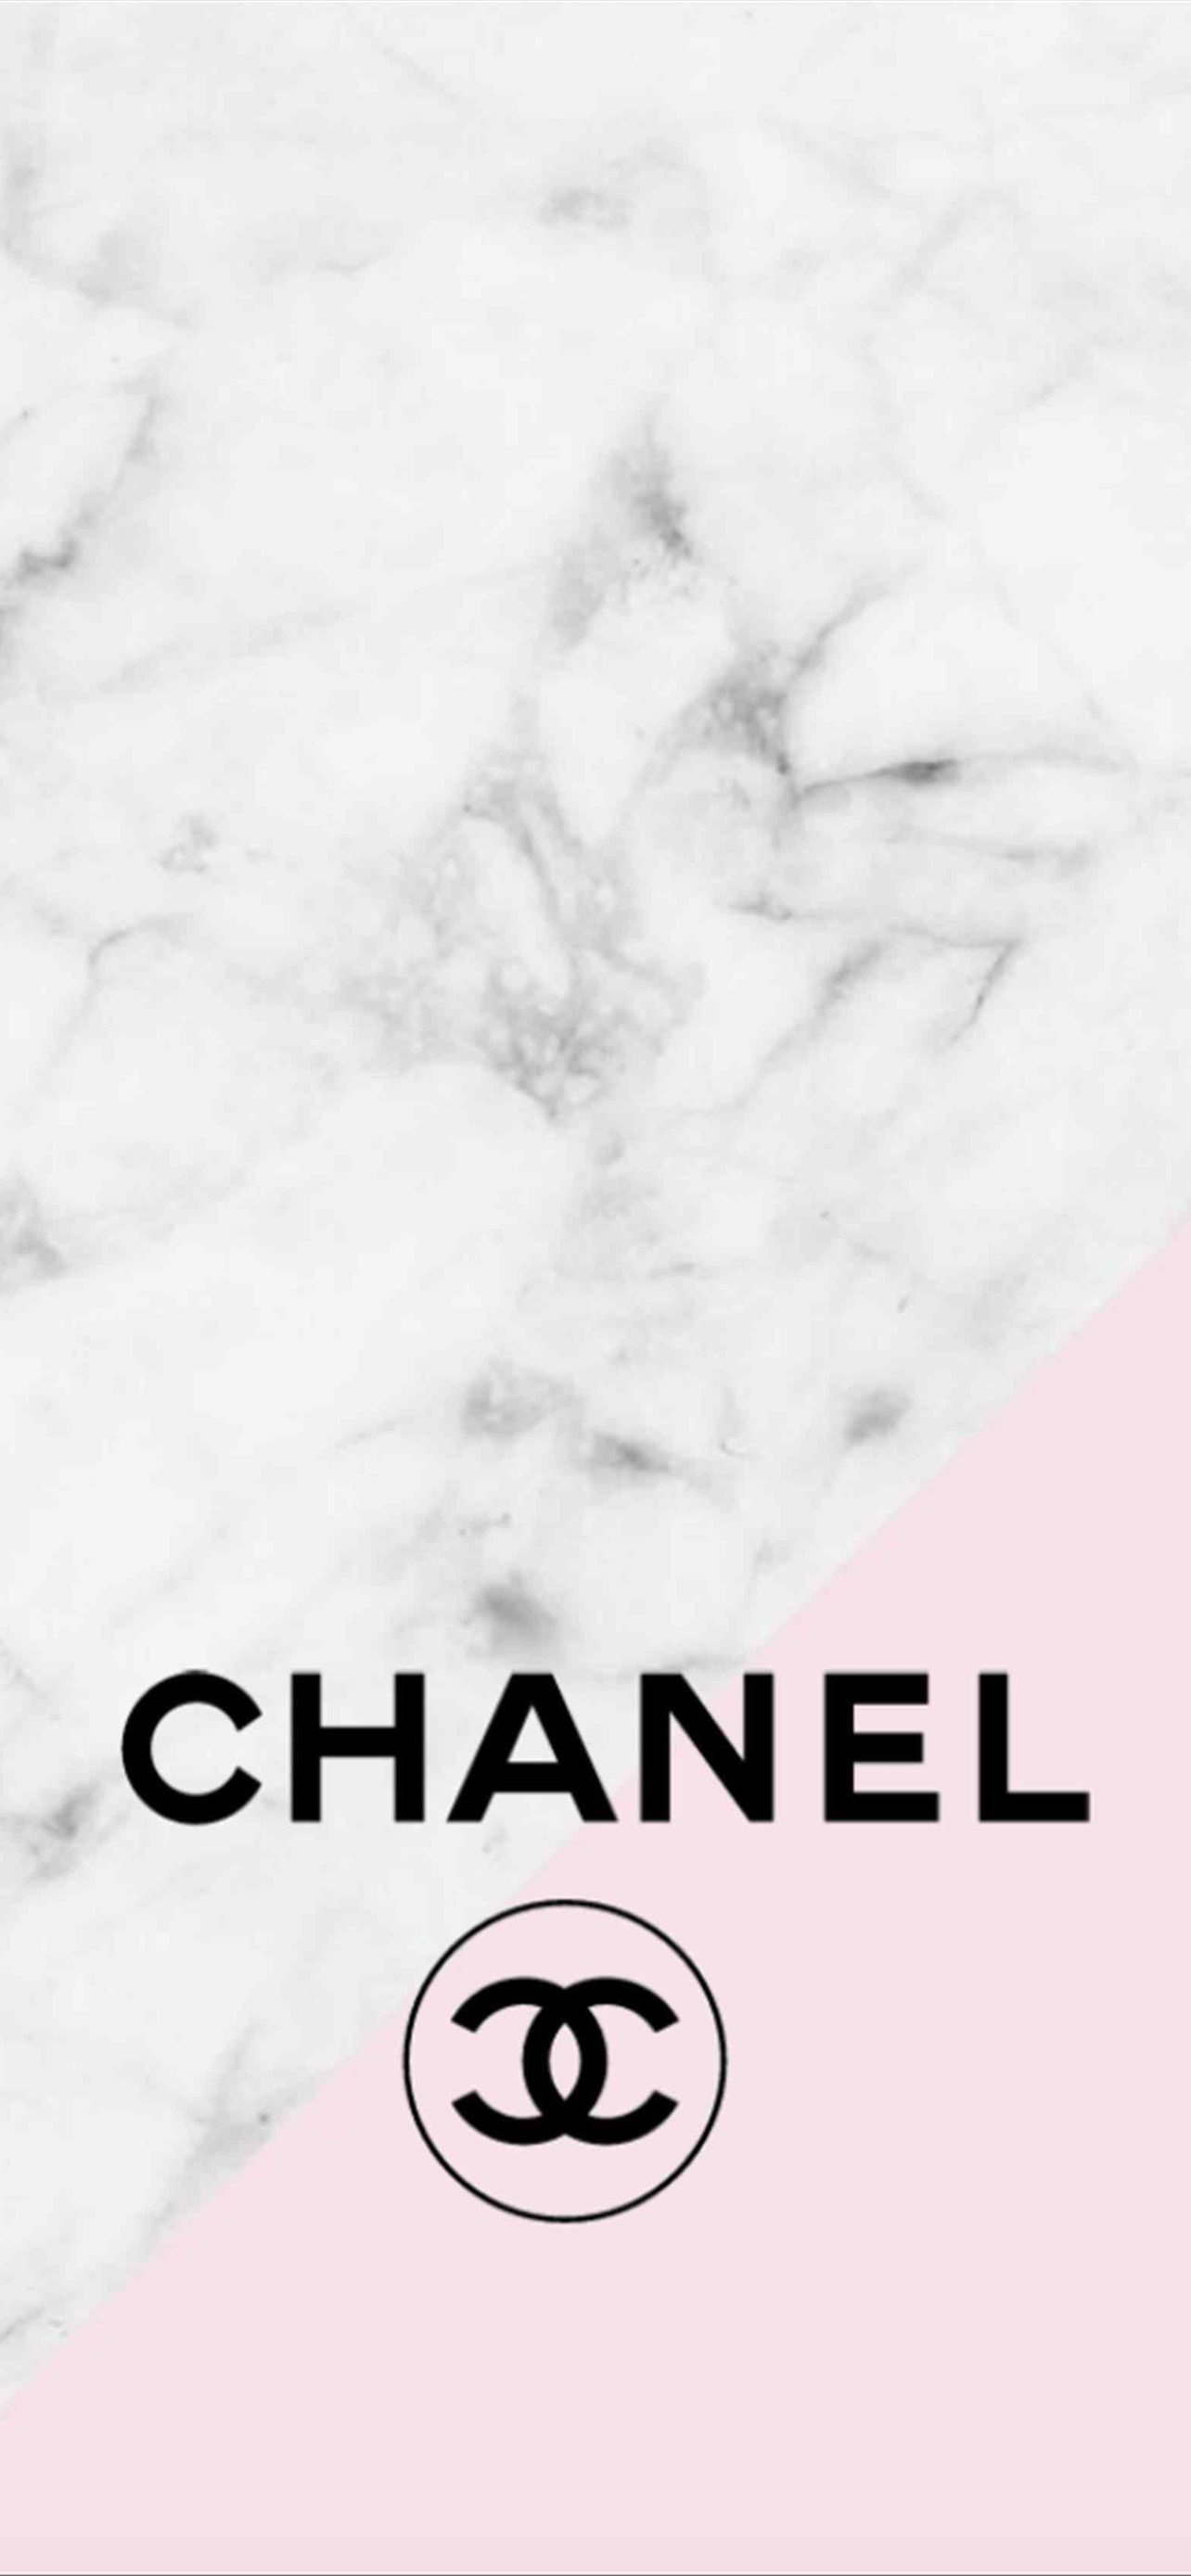 Coco Chanel Iphone Wallpapers Free Download